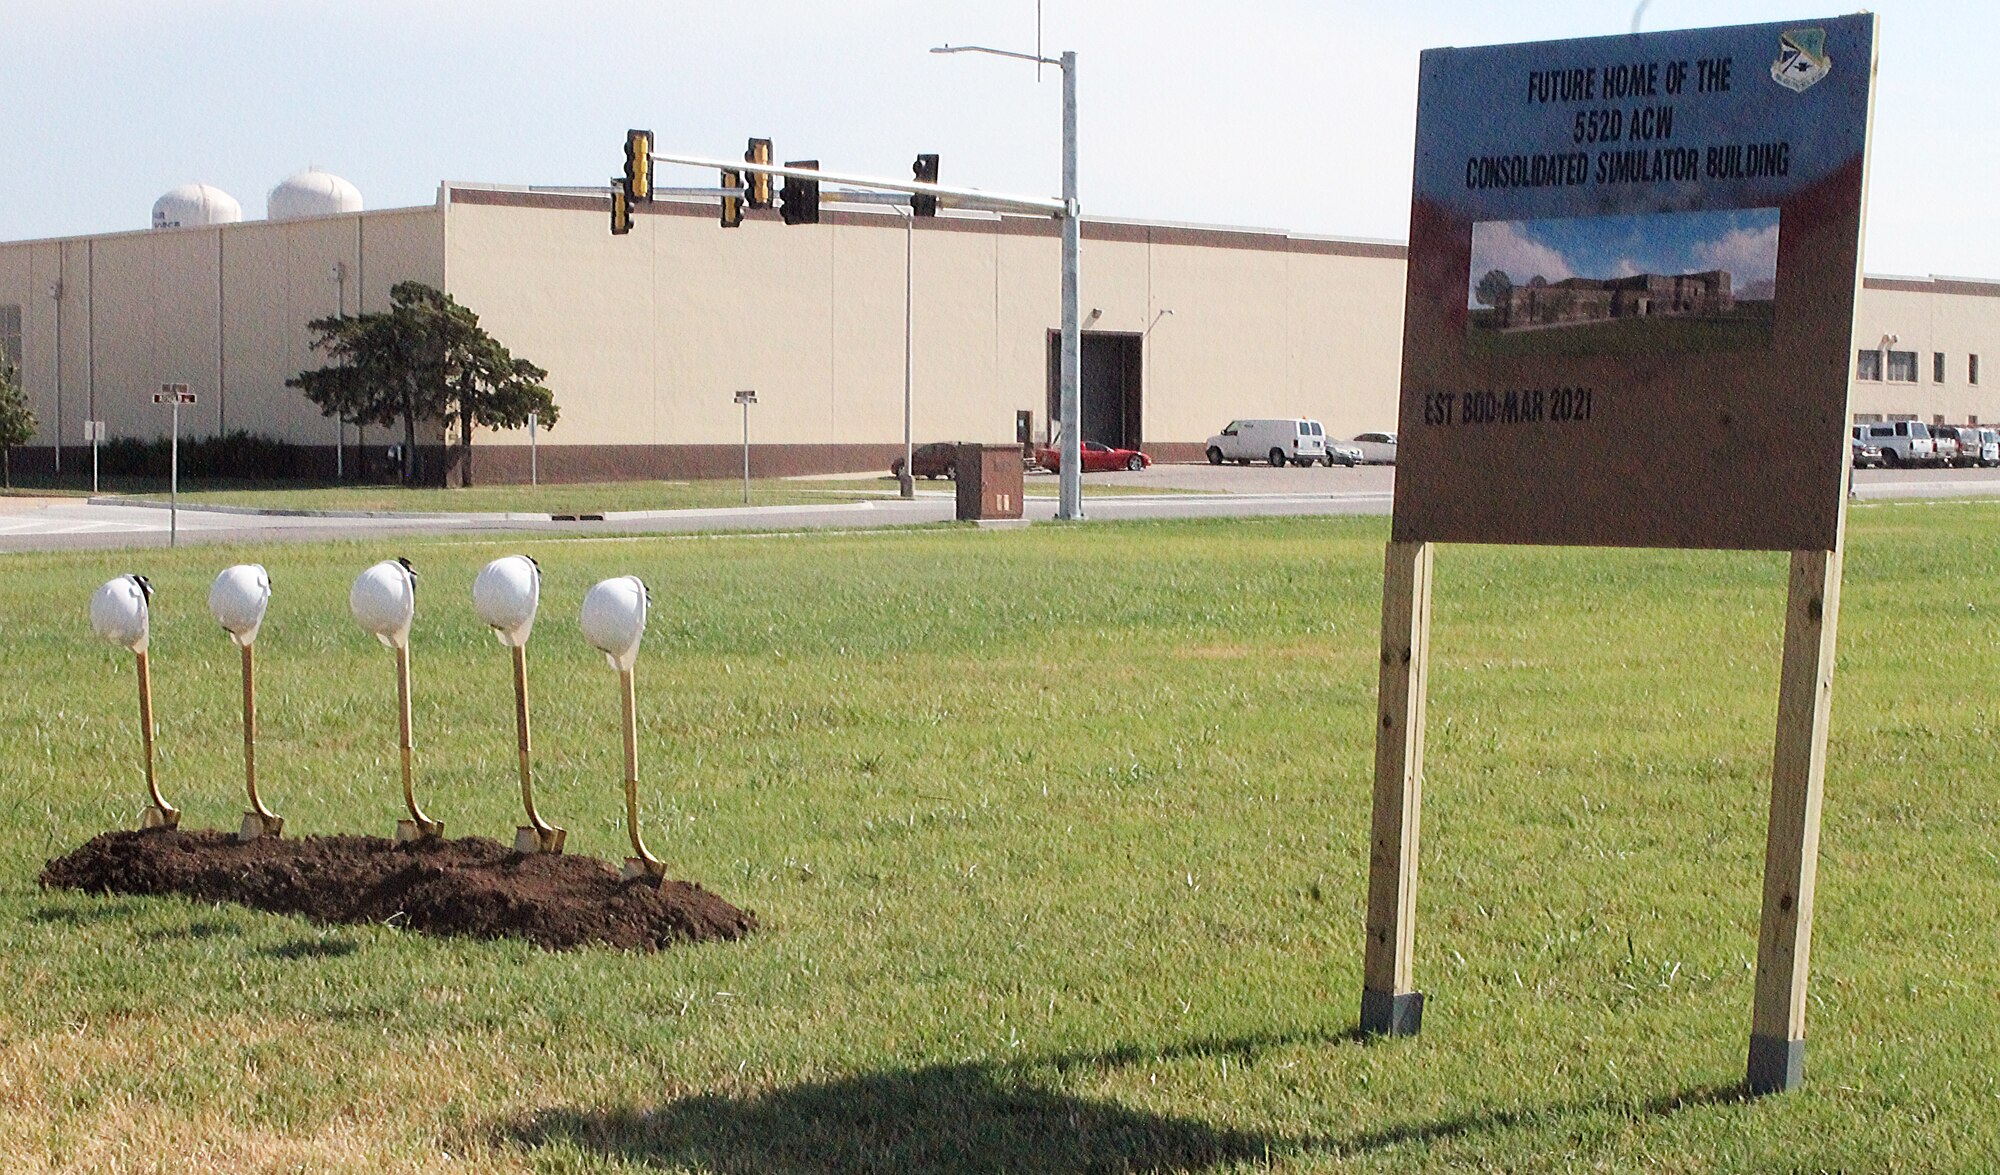 The 552nd Air Control Wing prepares for the ground breaking of an E-3 Sentry Consolidated Simulator Building at Tinker Air Force Base on August 16, 2019. This new building will house the E-3 DRAGON Flight Deck Sims, E-3 Mission sims, and Command and Reporting Center mission sims. (U.S. Air Force photo by 2nd Lt. Ashlyn K. Paulson)